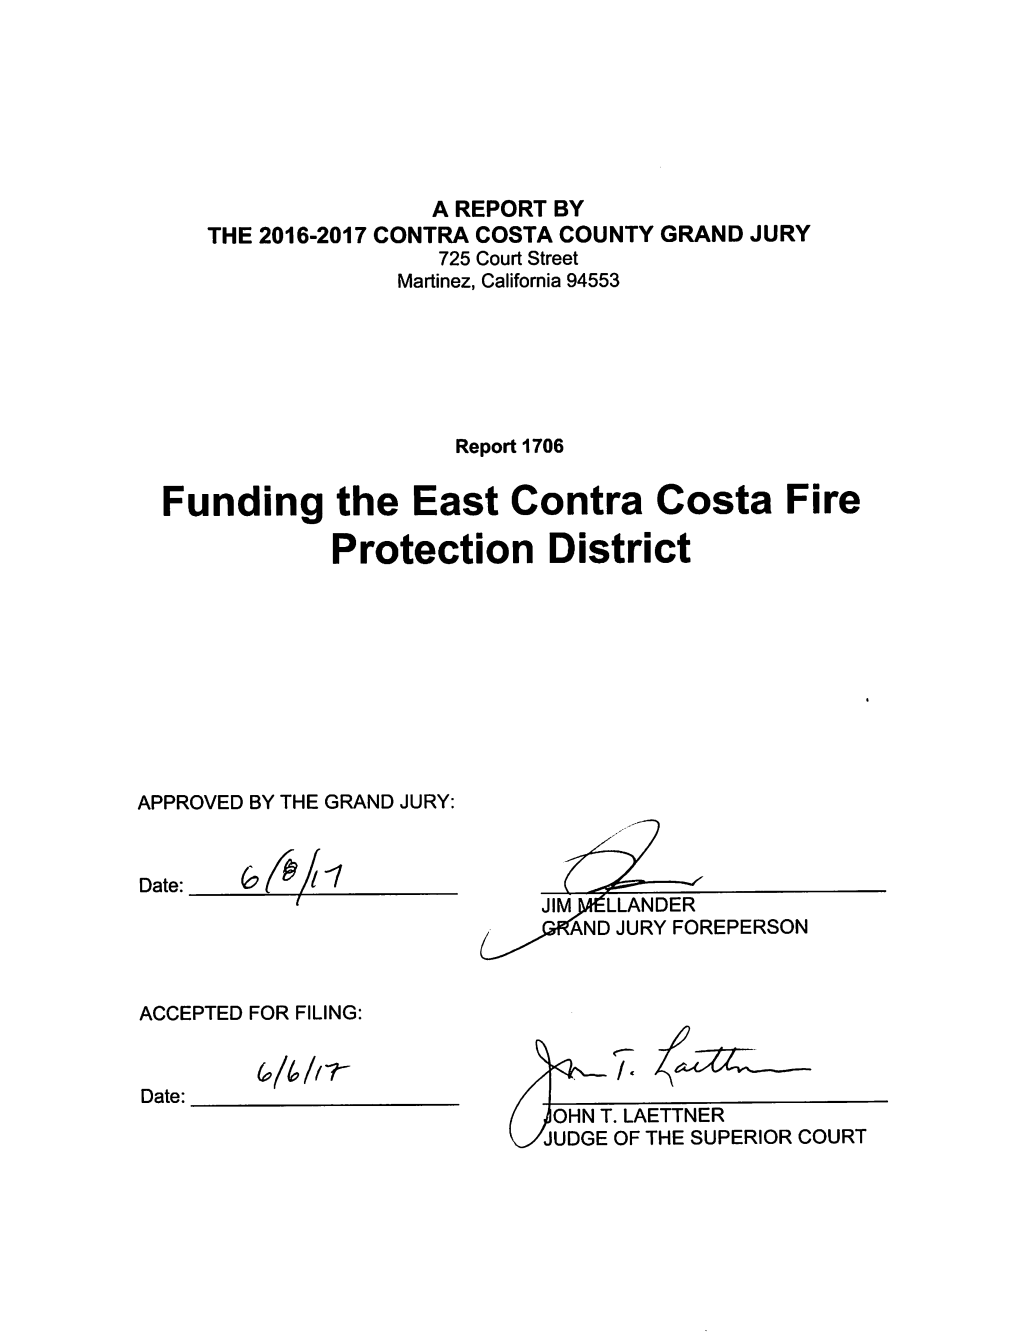 Funding the East Contra Costa Fire Protection District